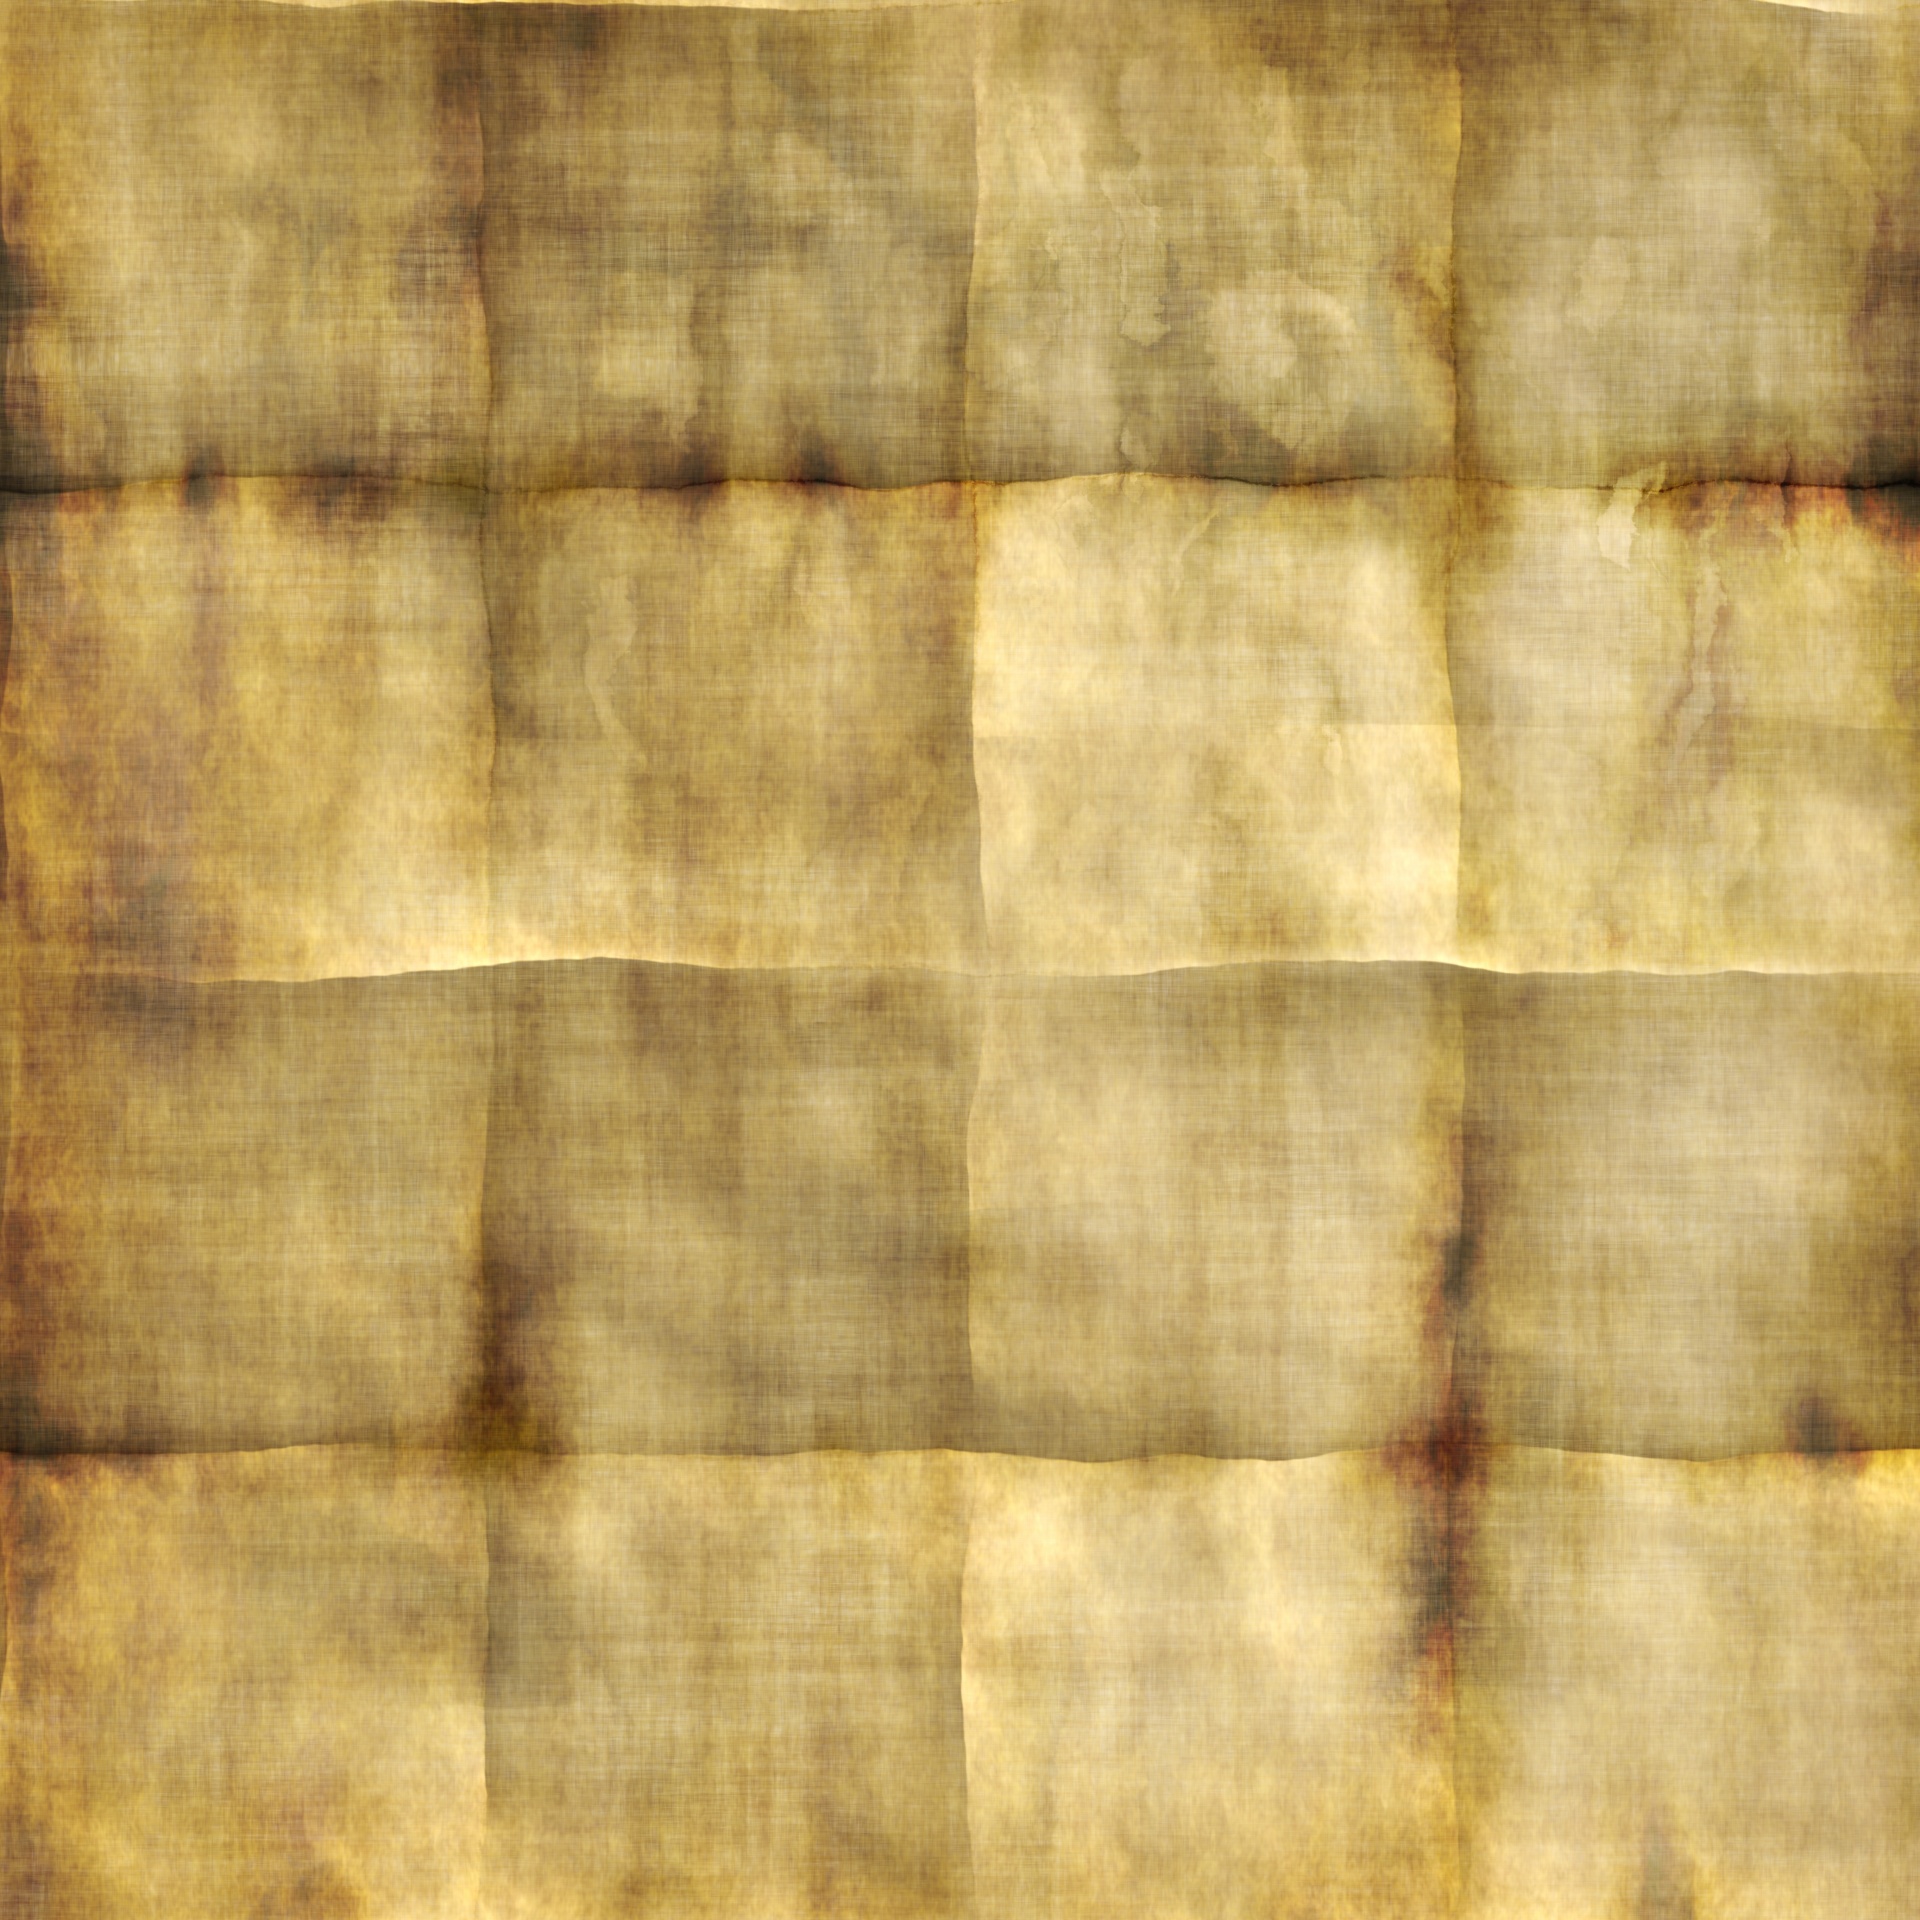 Antique Paper Texture Background. Tarnished Cardboard From Old Age